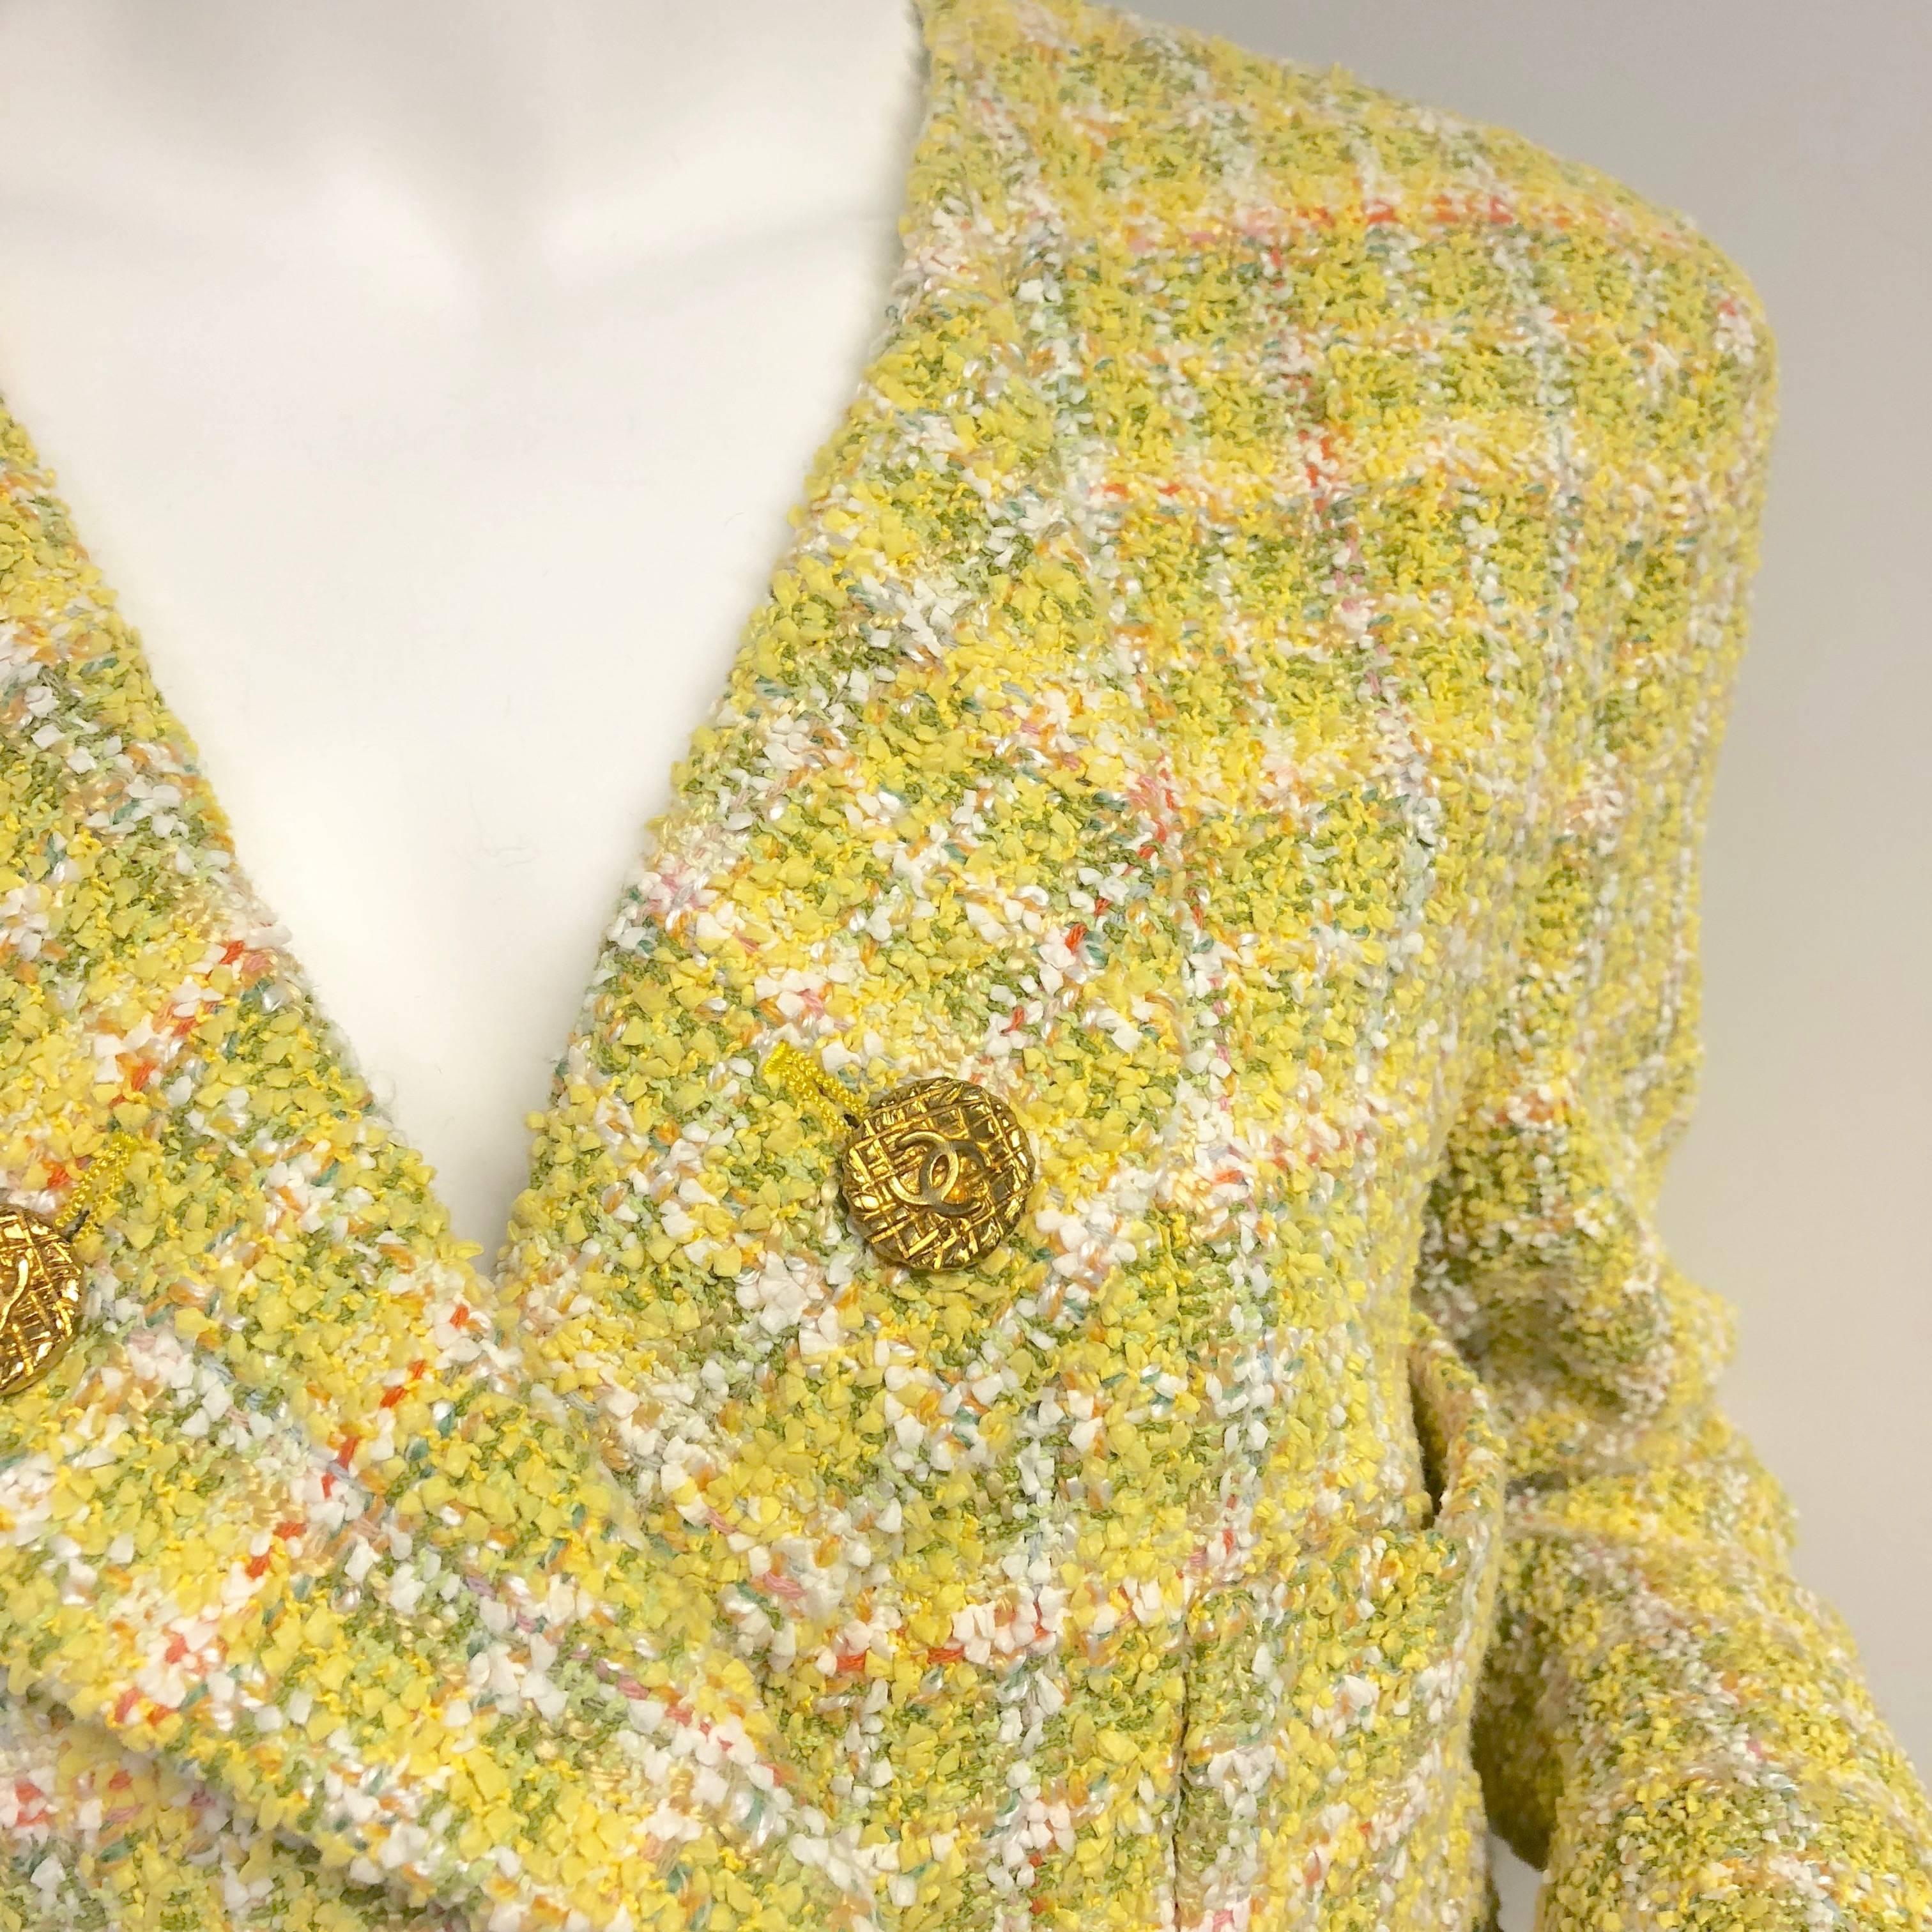 Vintage CHANEL yellow fantasy jacket with double breast and 5 gold quilted effect logo embossed buttons. Tweed has hints of mustard, chartreuse, pink and orange. 4 patch pockets in front. Each cuff has 3 working buttons. Signature CC embossed lining